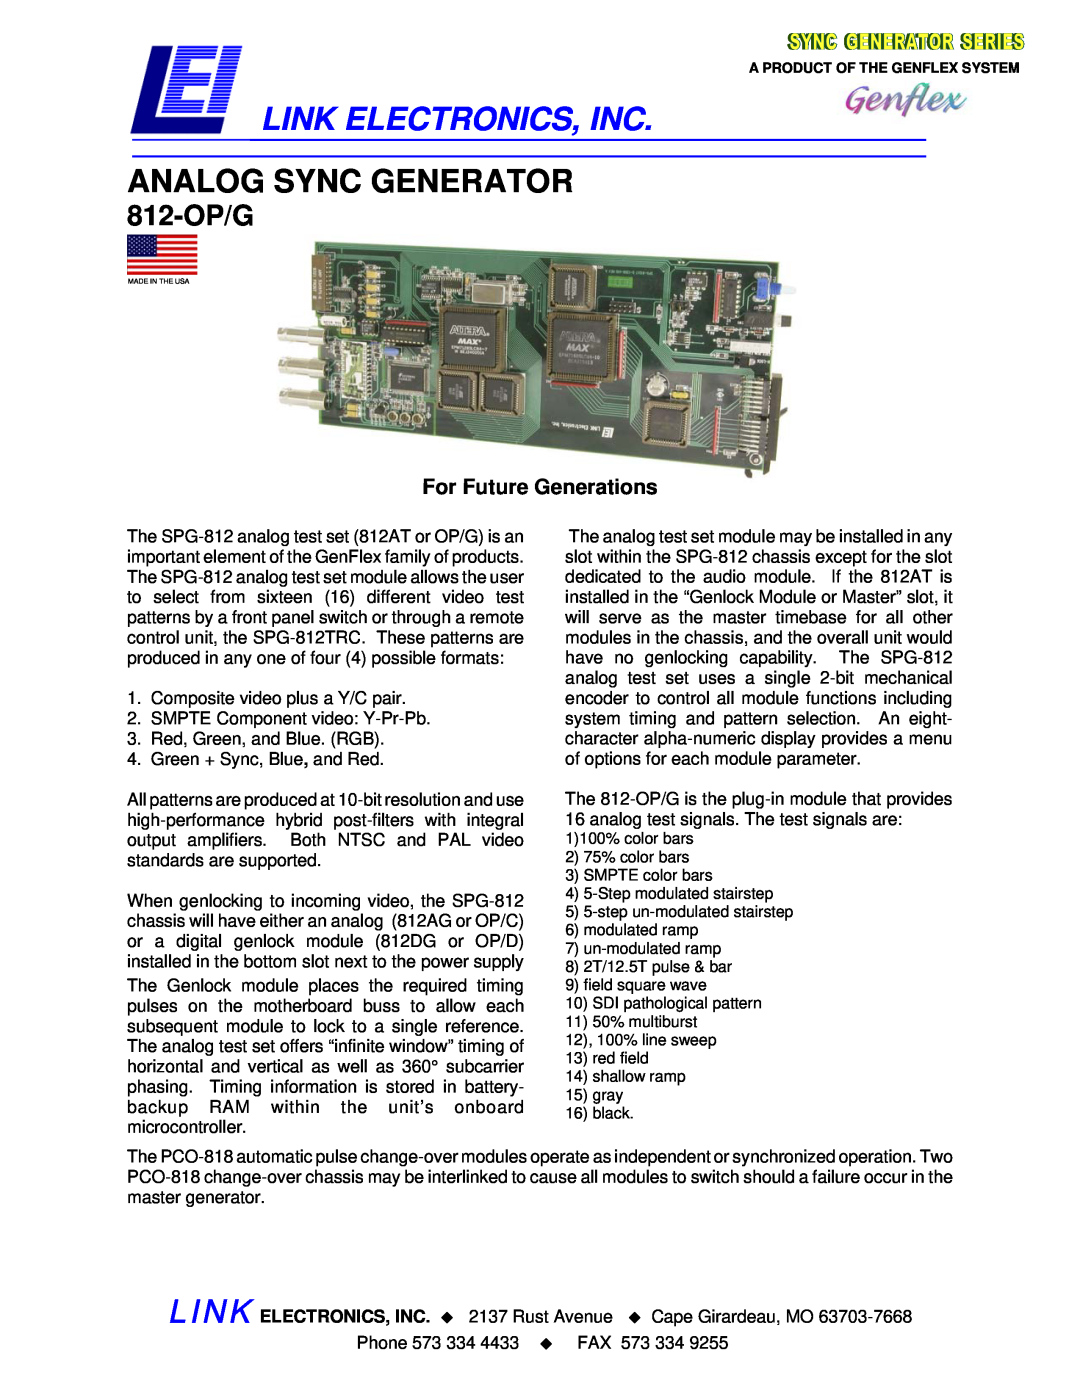 Link electronic 812-OP/G manual For Future Generations, Link Electronics, Inc, Analog Sync Generator 